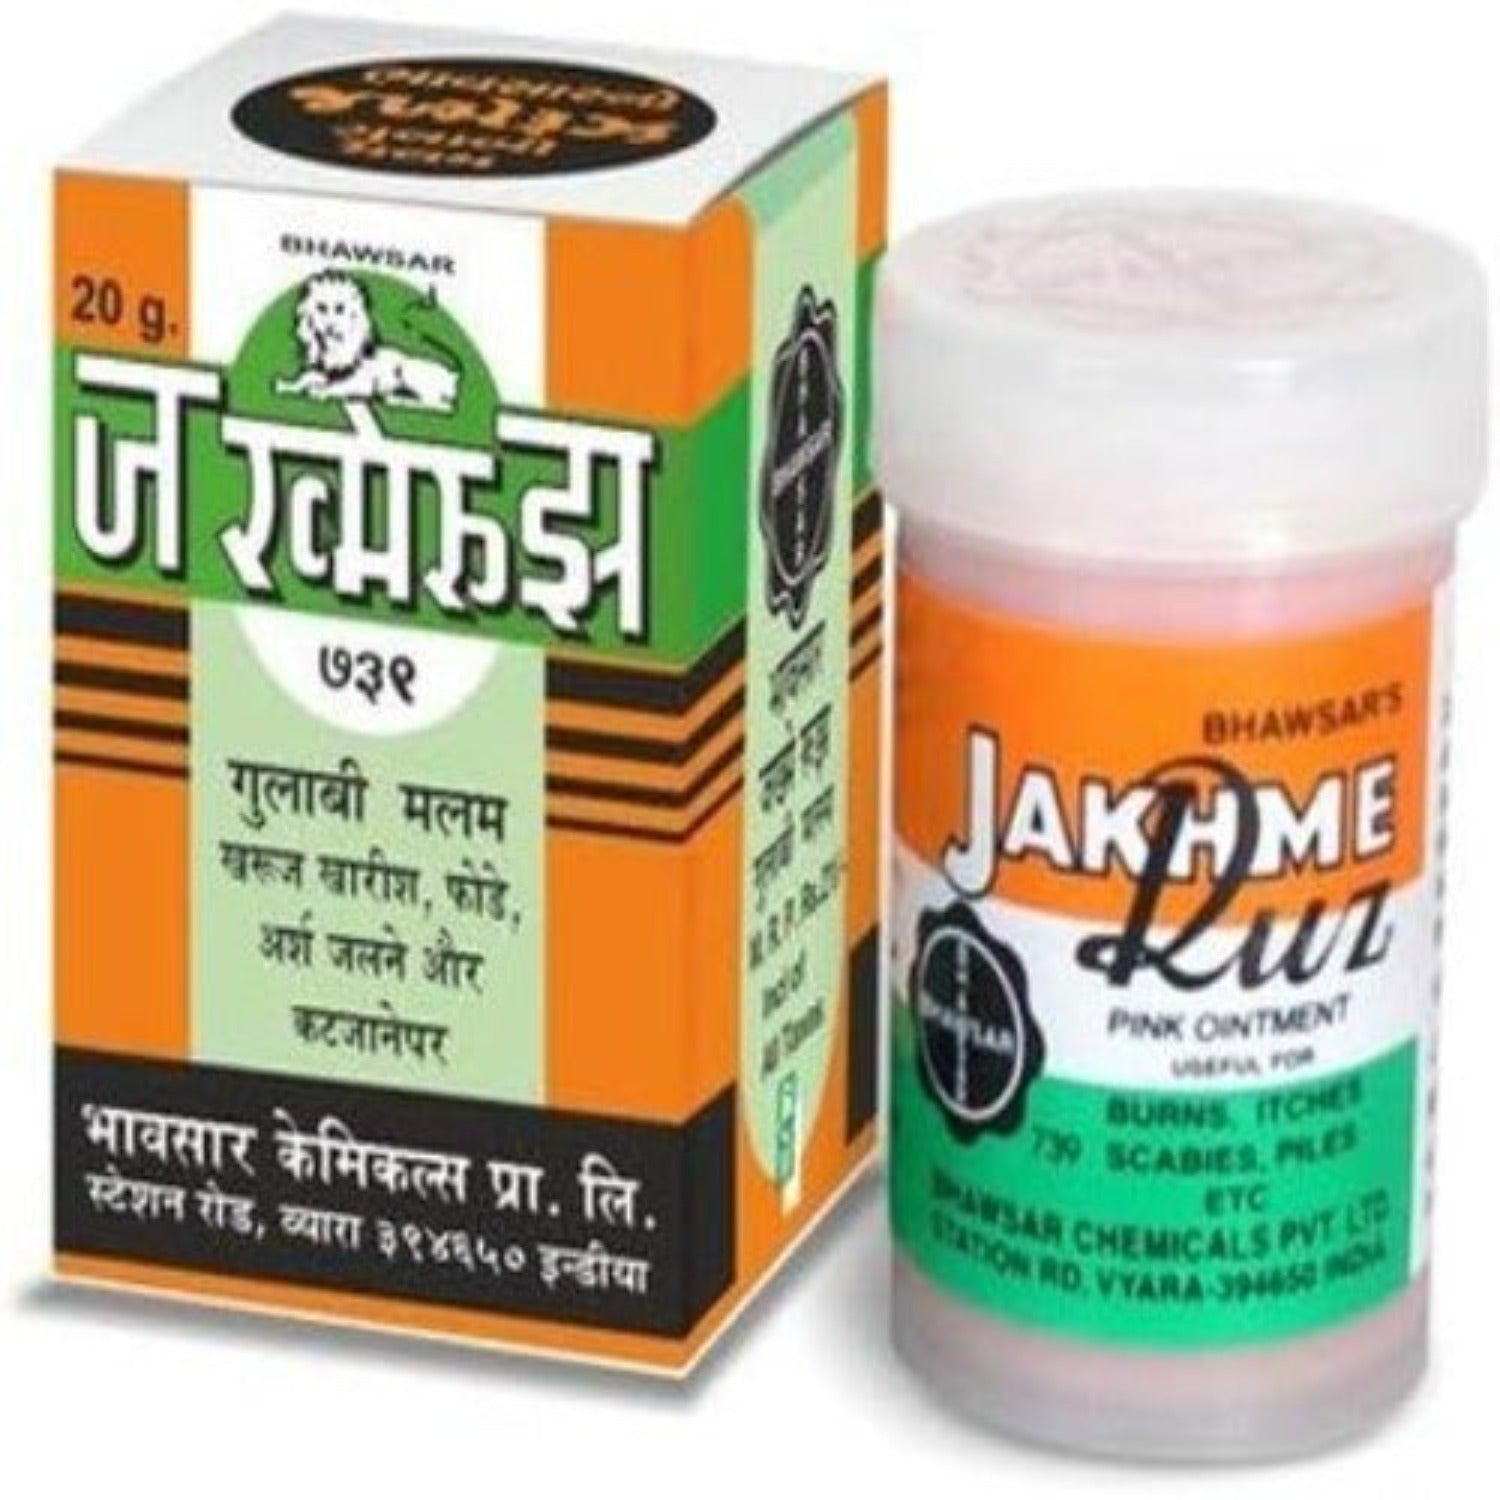 Bhawsar Jakhme Ruz Pink Ointment Malam Useful In Burns,Itchis,Scabibes & Piles